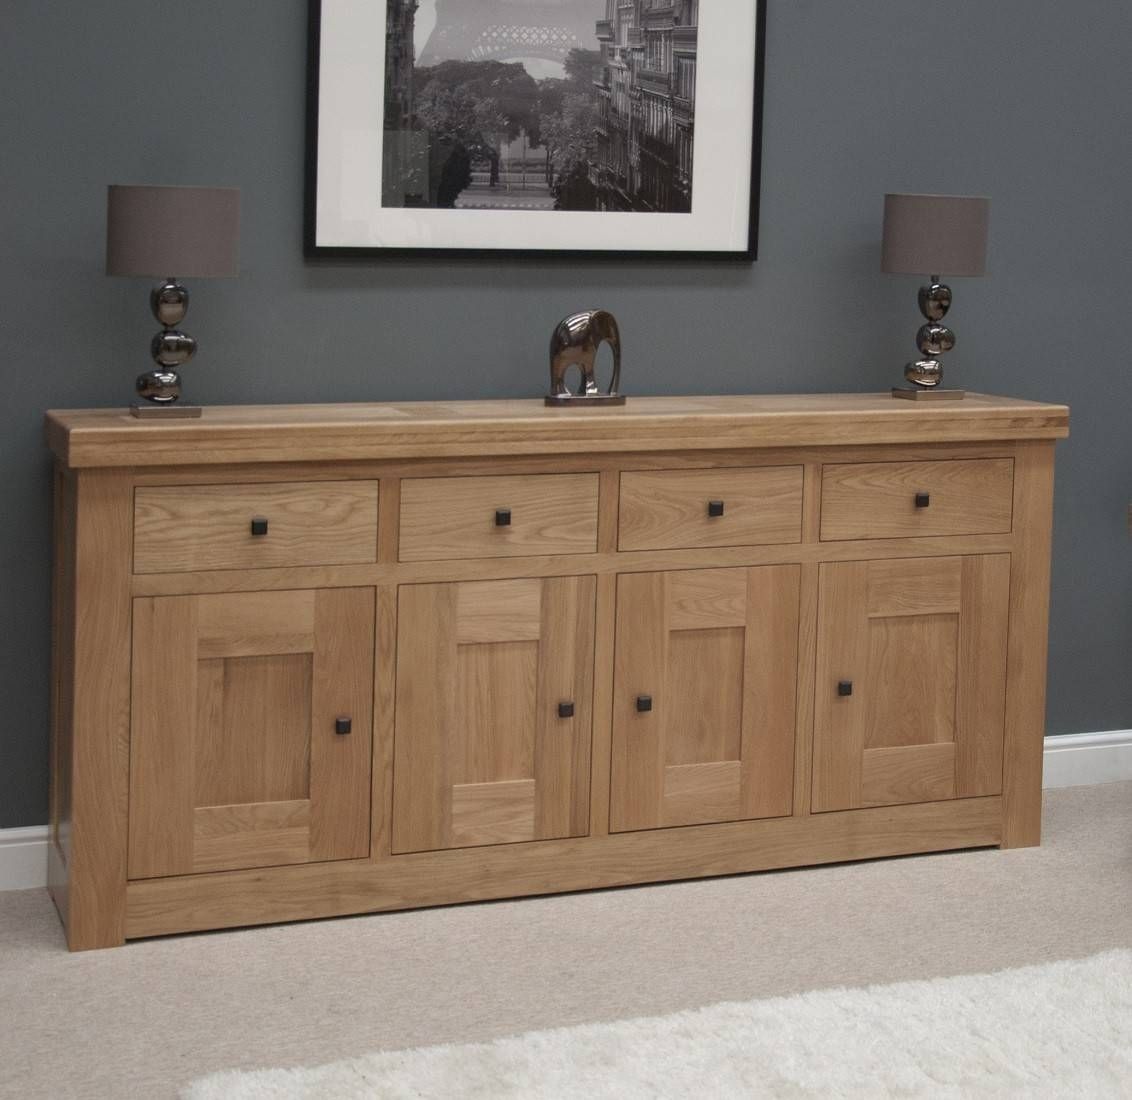 French Bordeaux Oak Extra Large 4 Door Sideboard | Oak Furniture Uk Pertaining To Most Current Oak Furniture Sideboards (View 3 of 15)